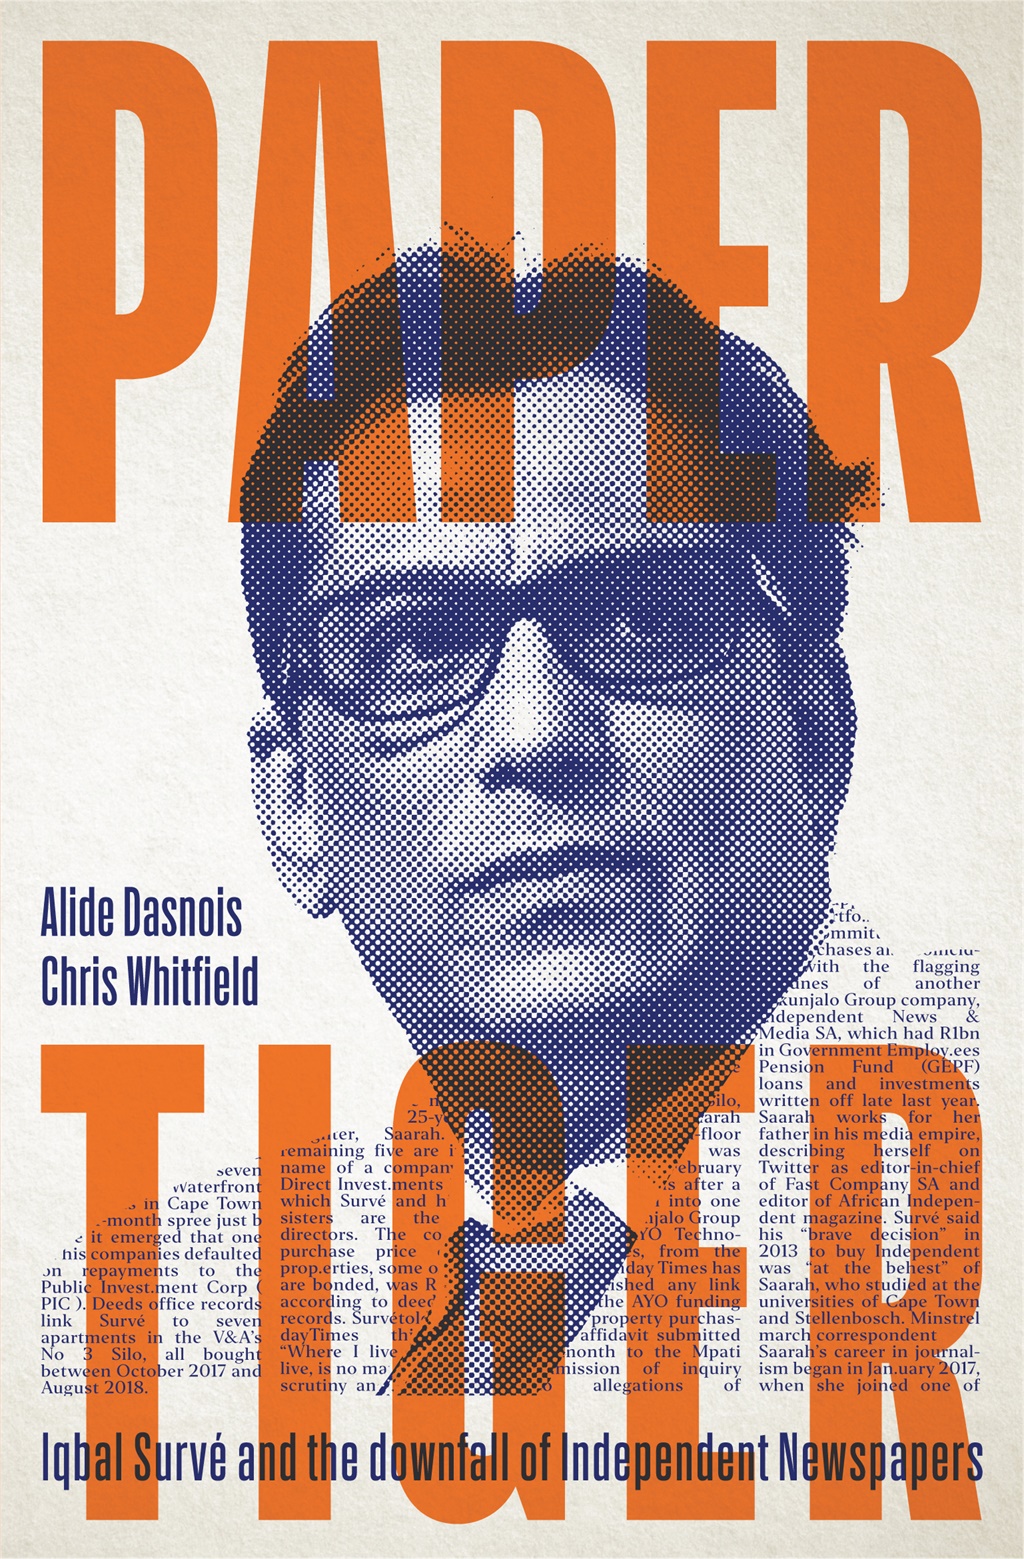 Paper Tiger by Alide Dasnois and Chris Whitfield, published by NB Publishers.